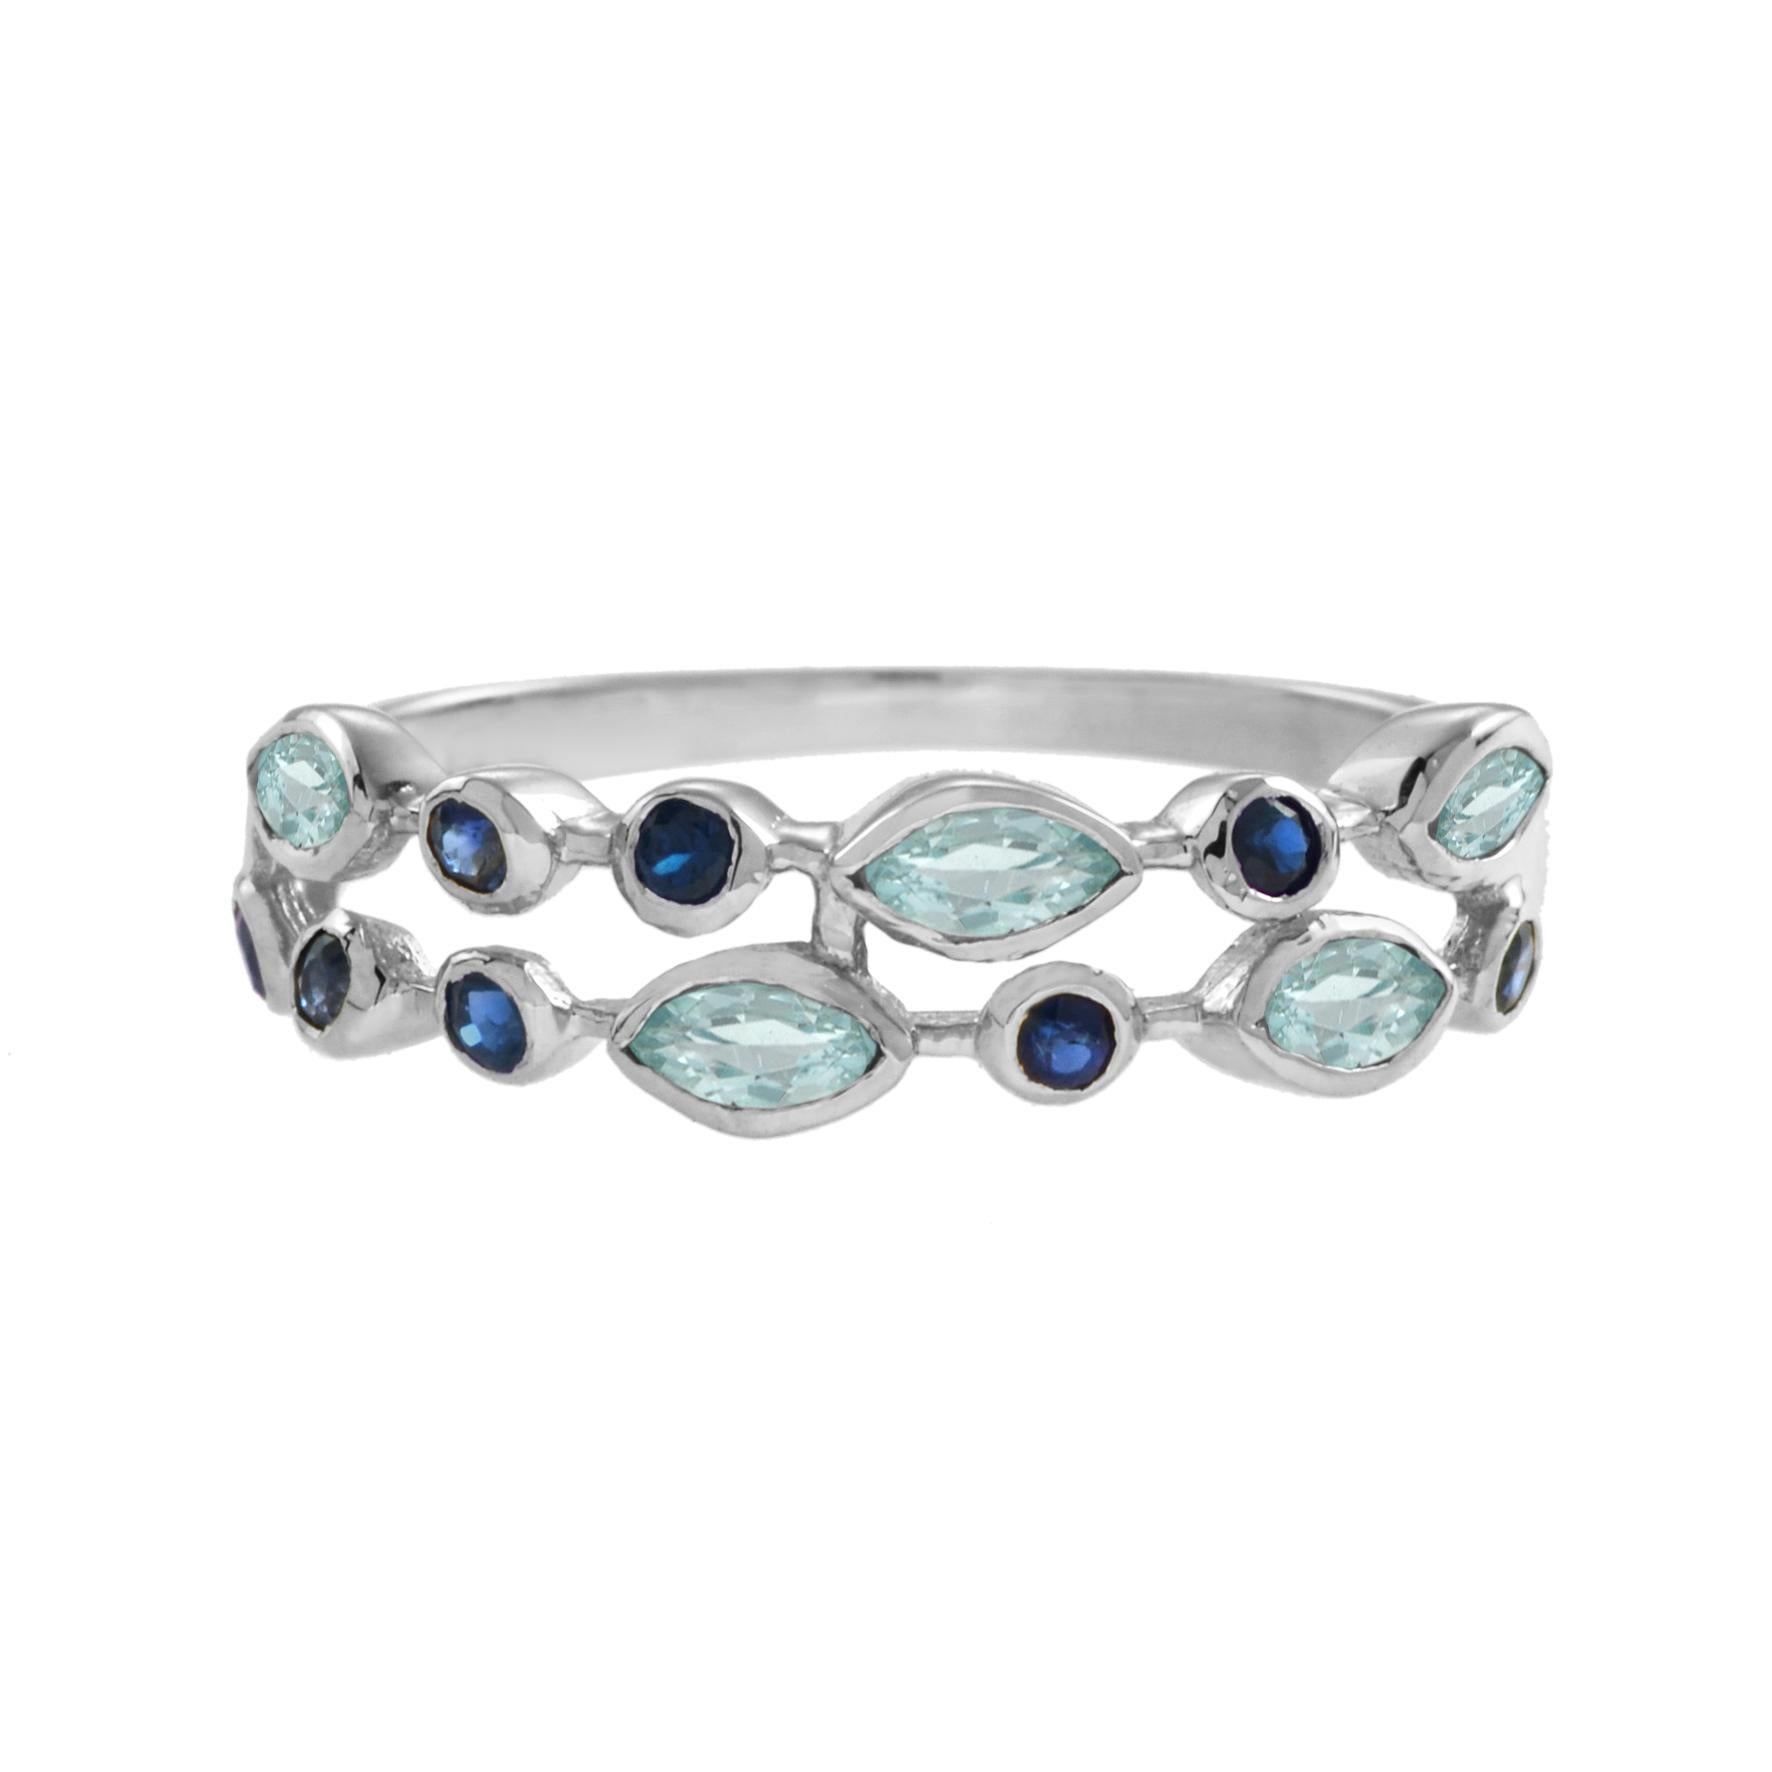 For Sale:  Double Row Aquamarine and Sapphire Eternity Ring in 14K White Gold 2